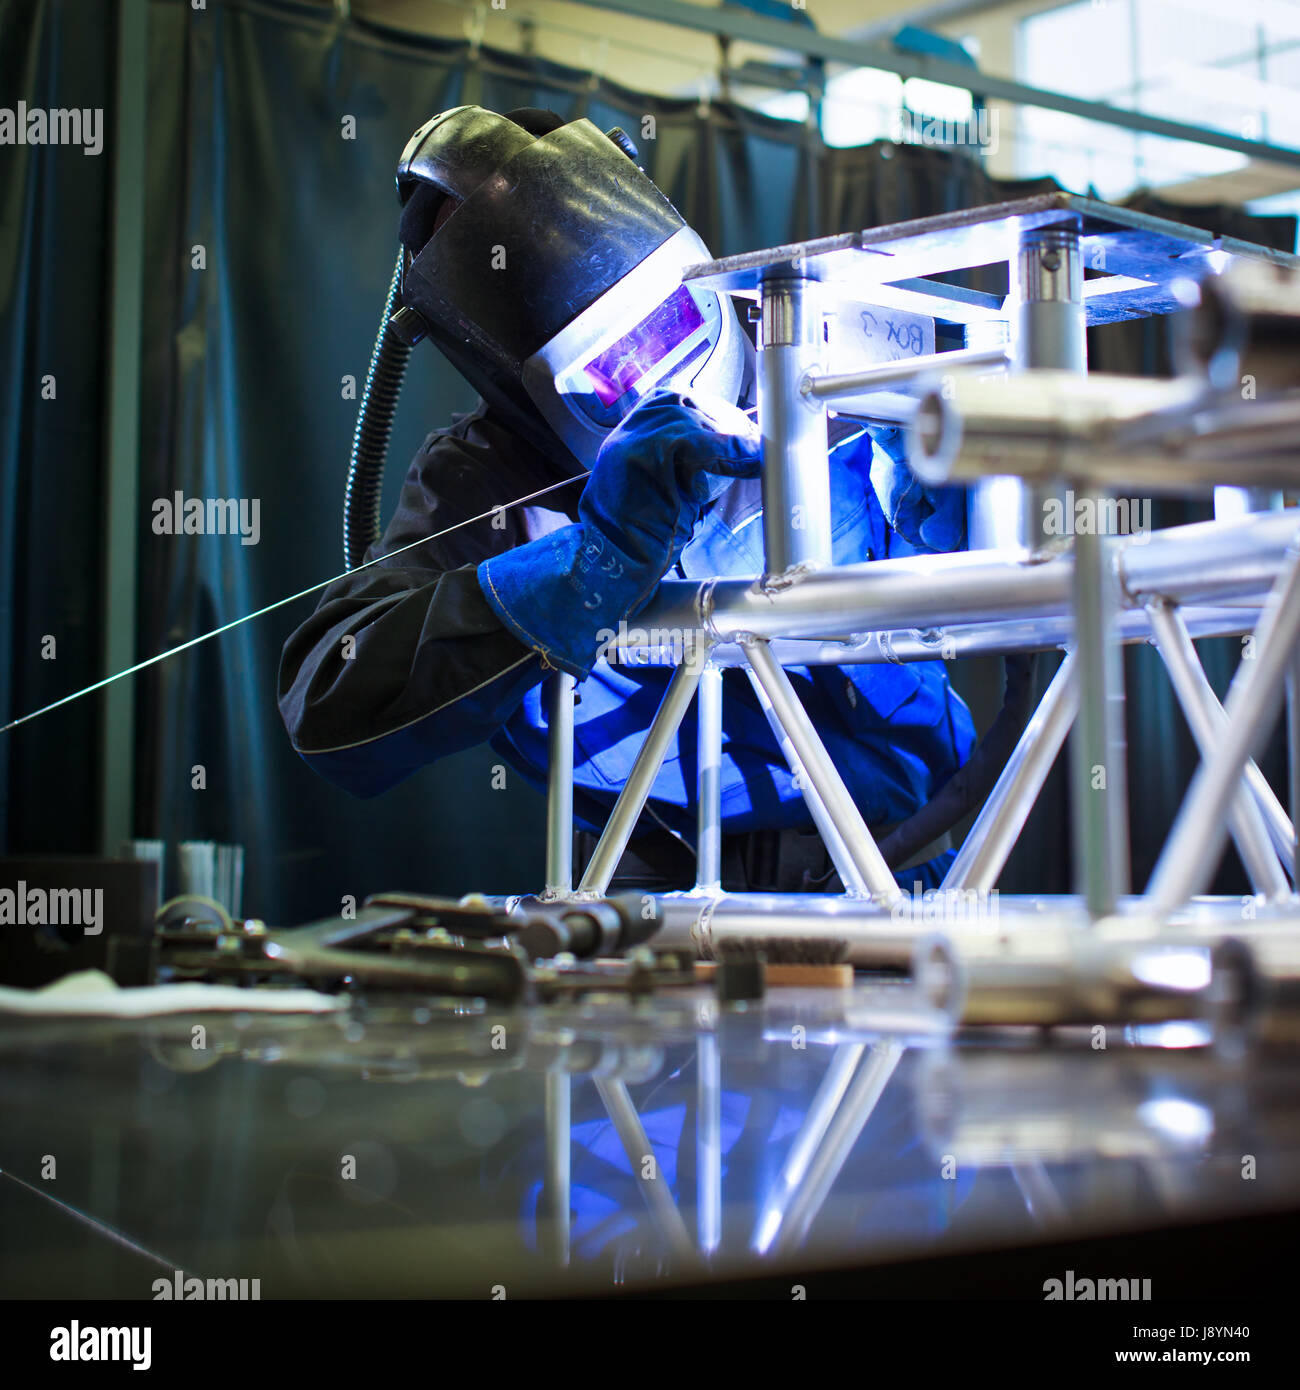 industry, machinery, manufacture, machinist, welding, workers, laborer, worker, Stock Photo